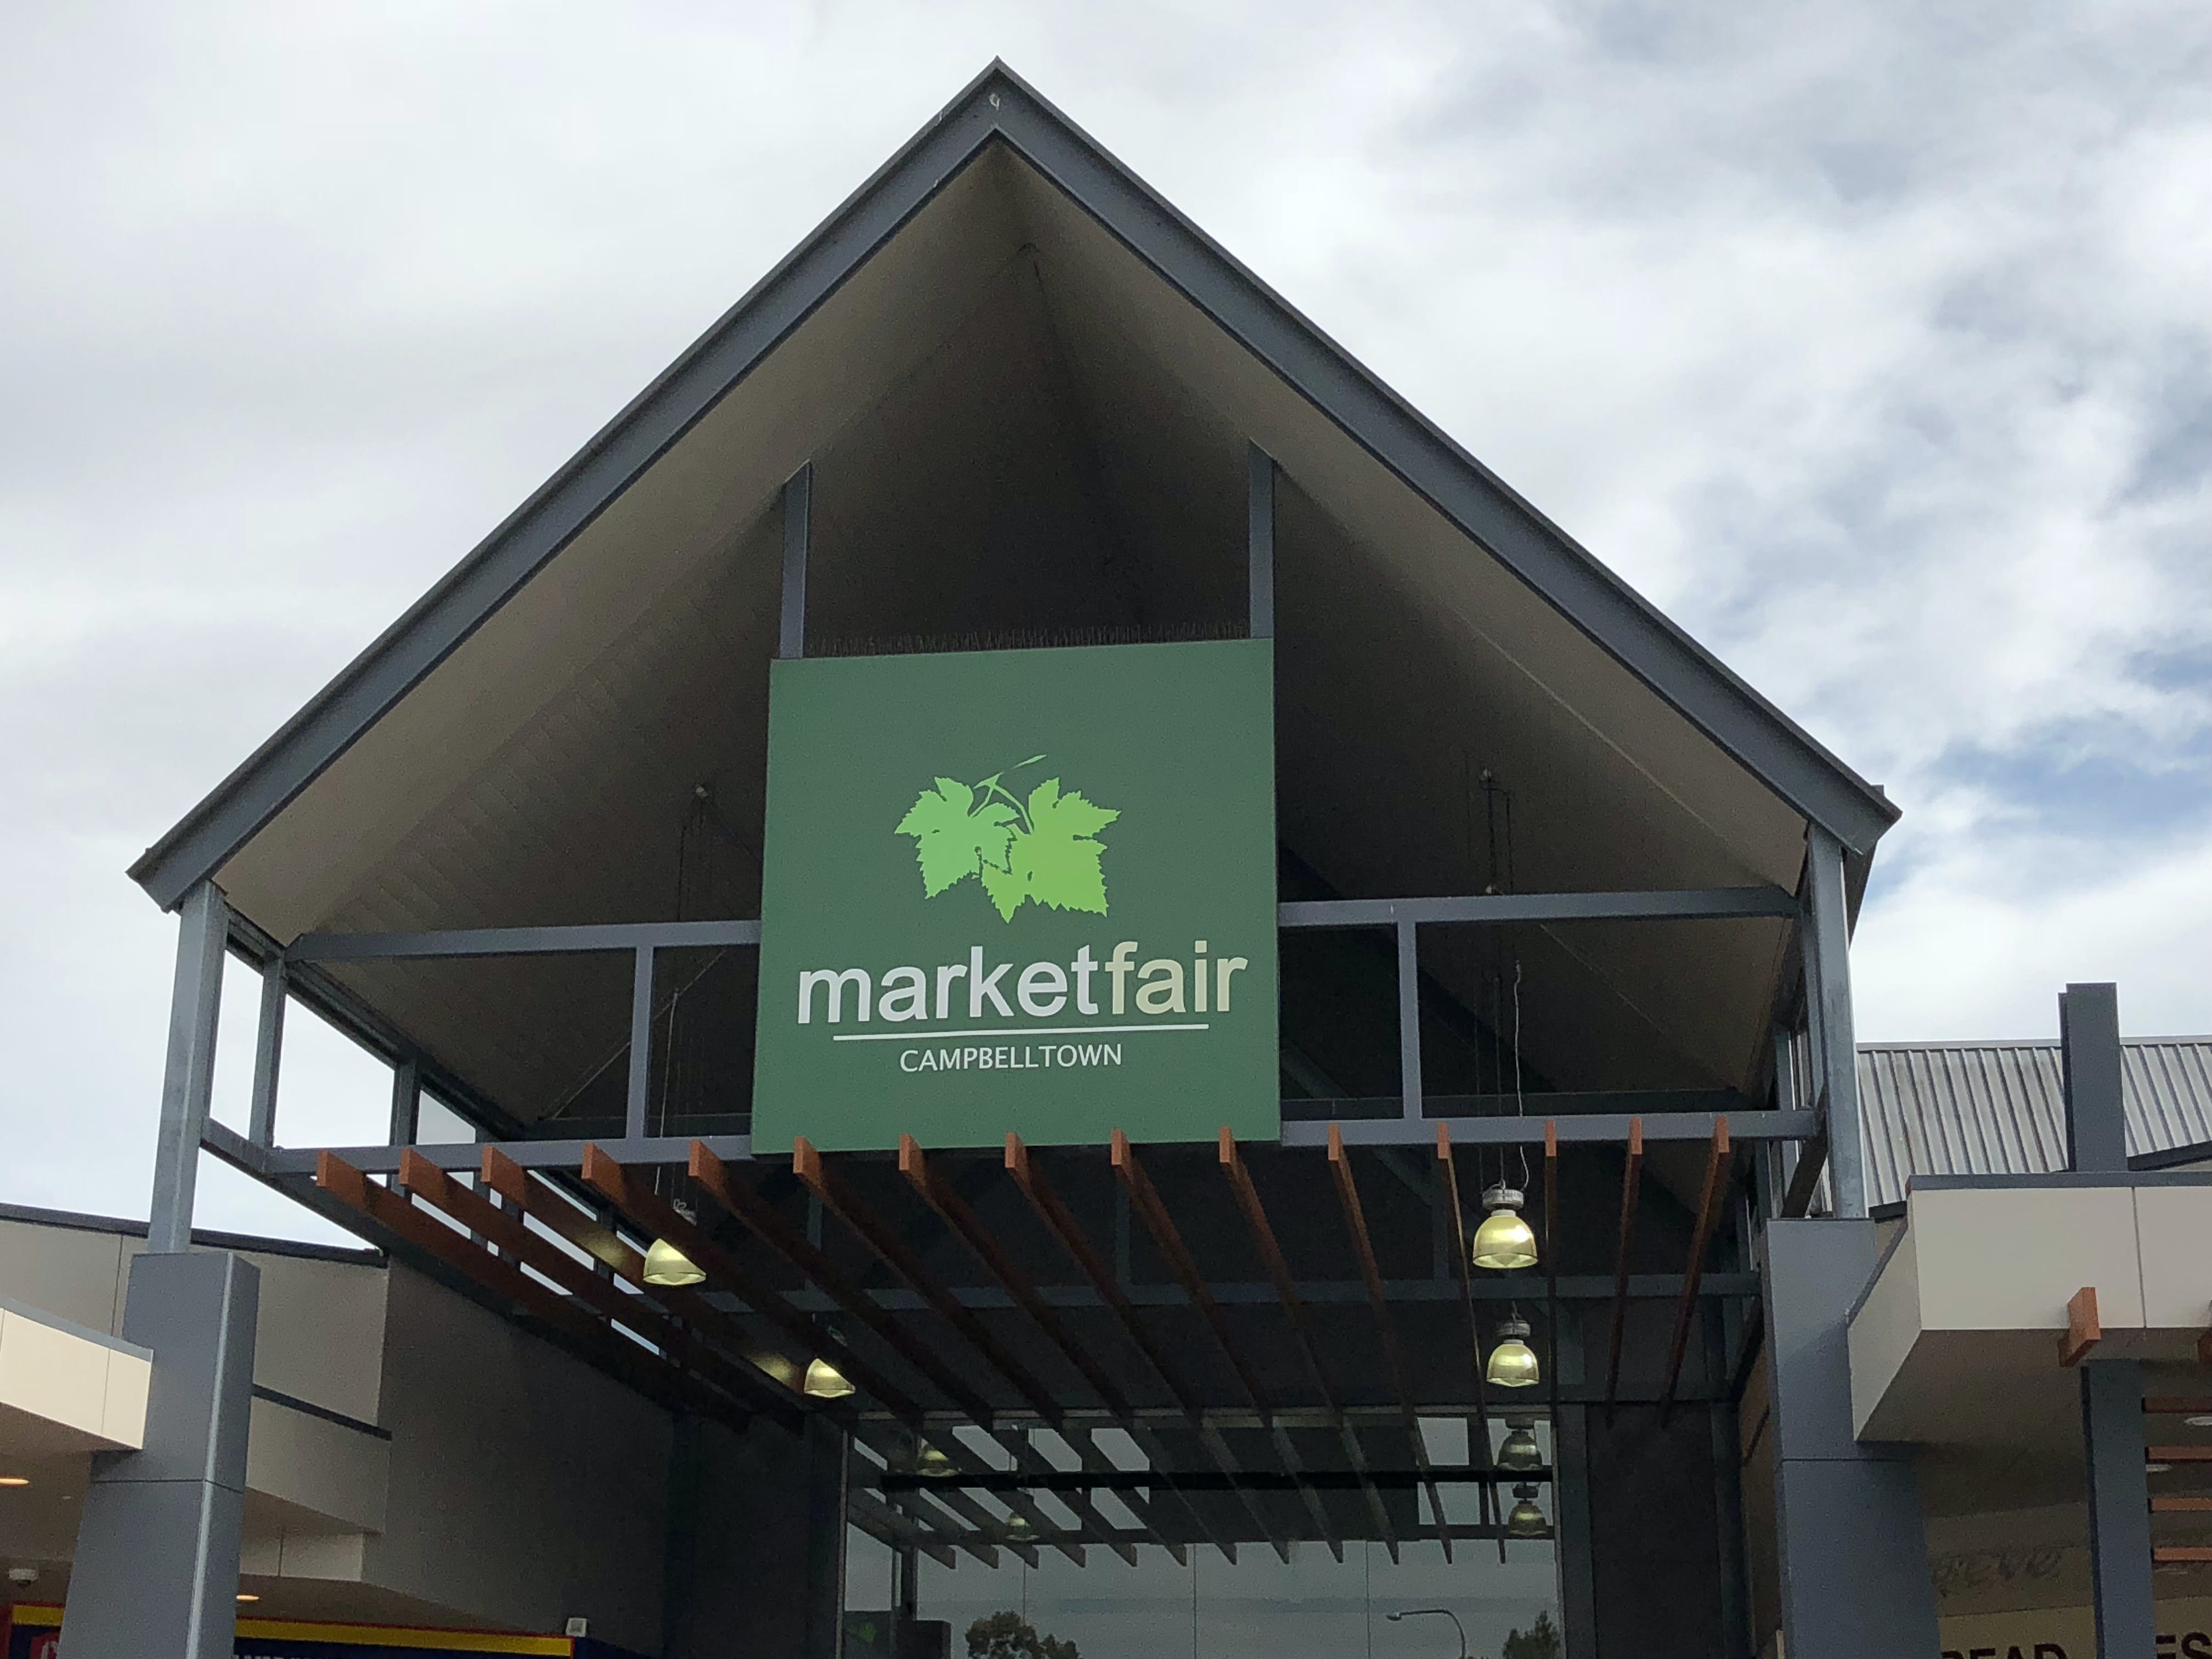 Marketfair Campbelltown Logo and Images